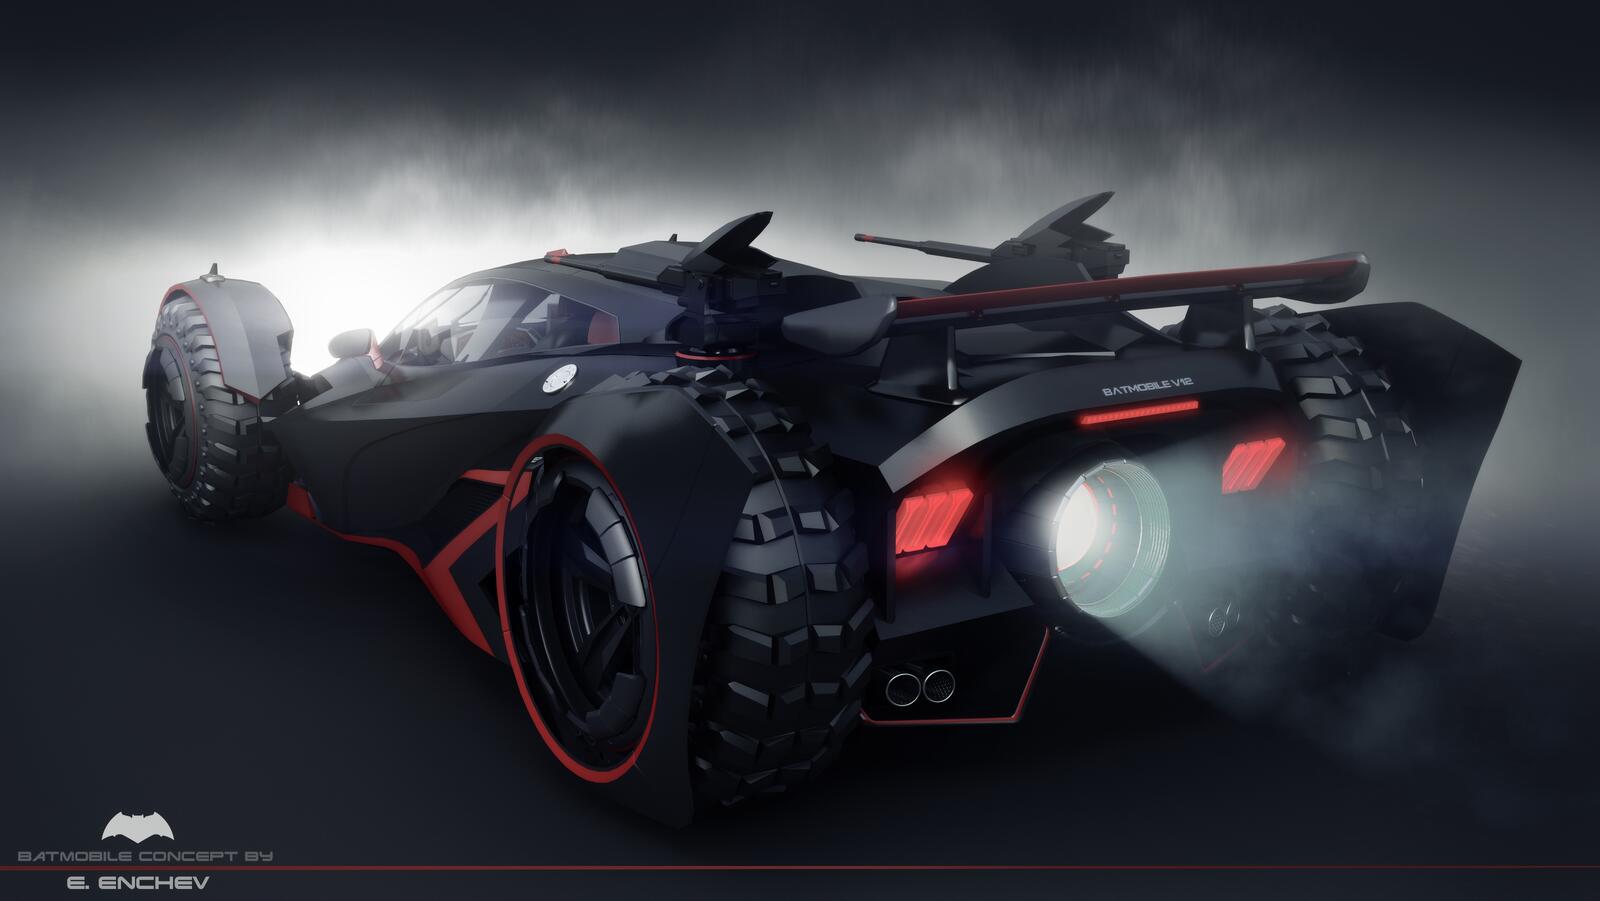 Wallpapers batmobile cars view from behind on the desktop